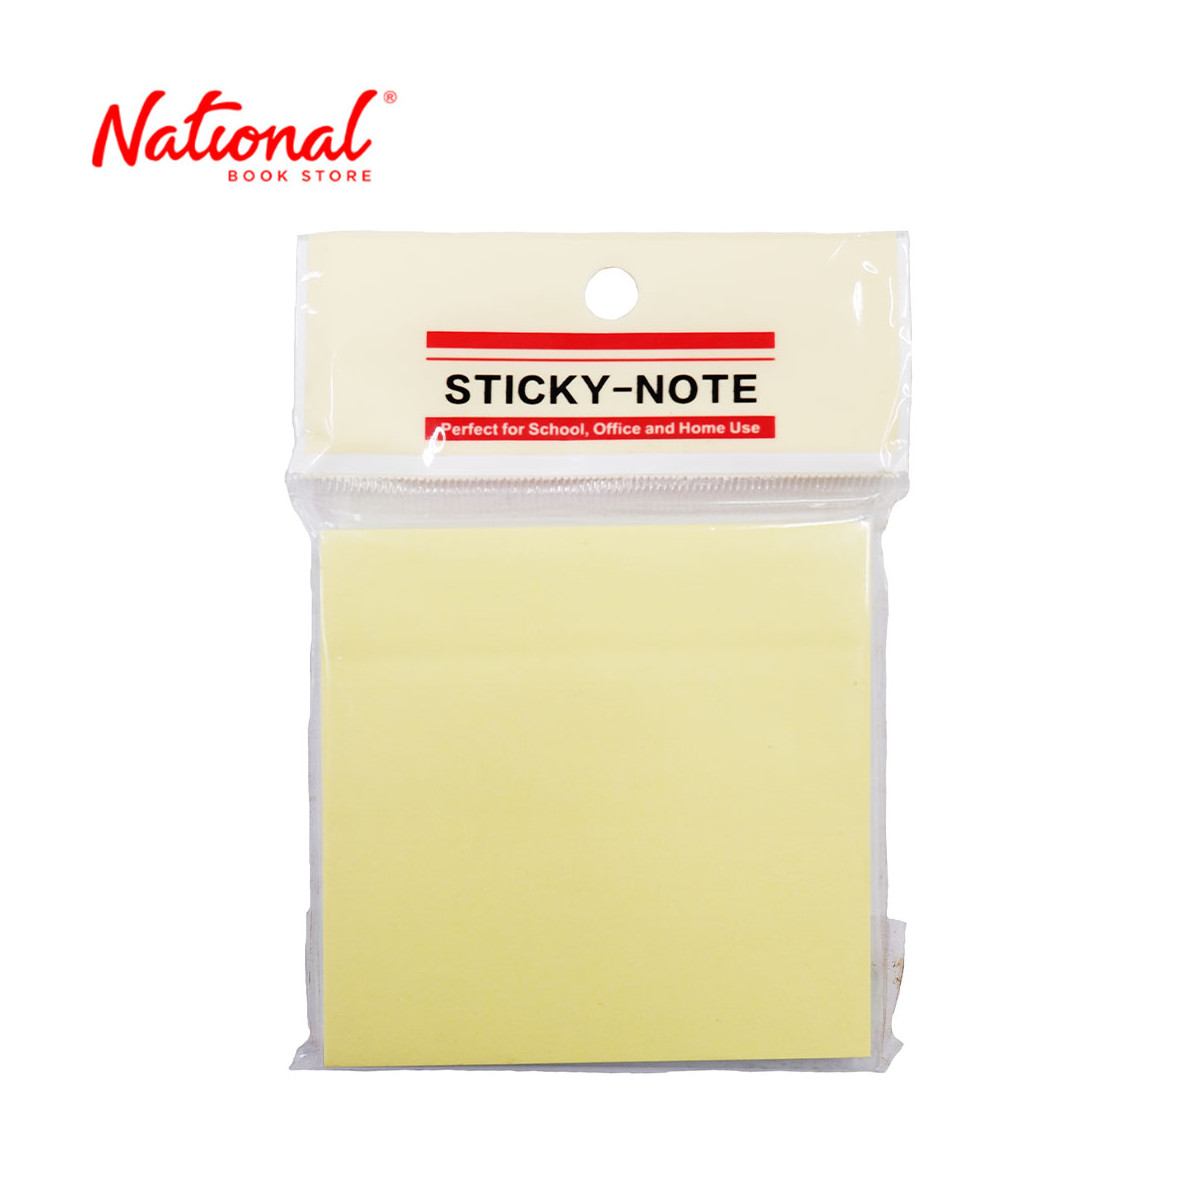 Sticky Notes 3x3 inches 30's (assorted colors) - School & Office Supplies - Note Pads